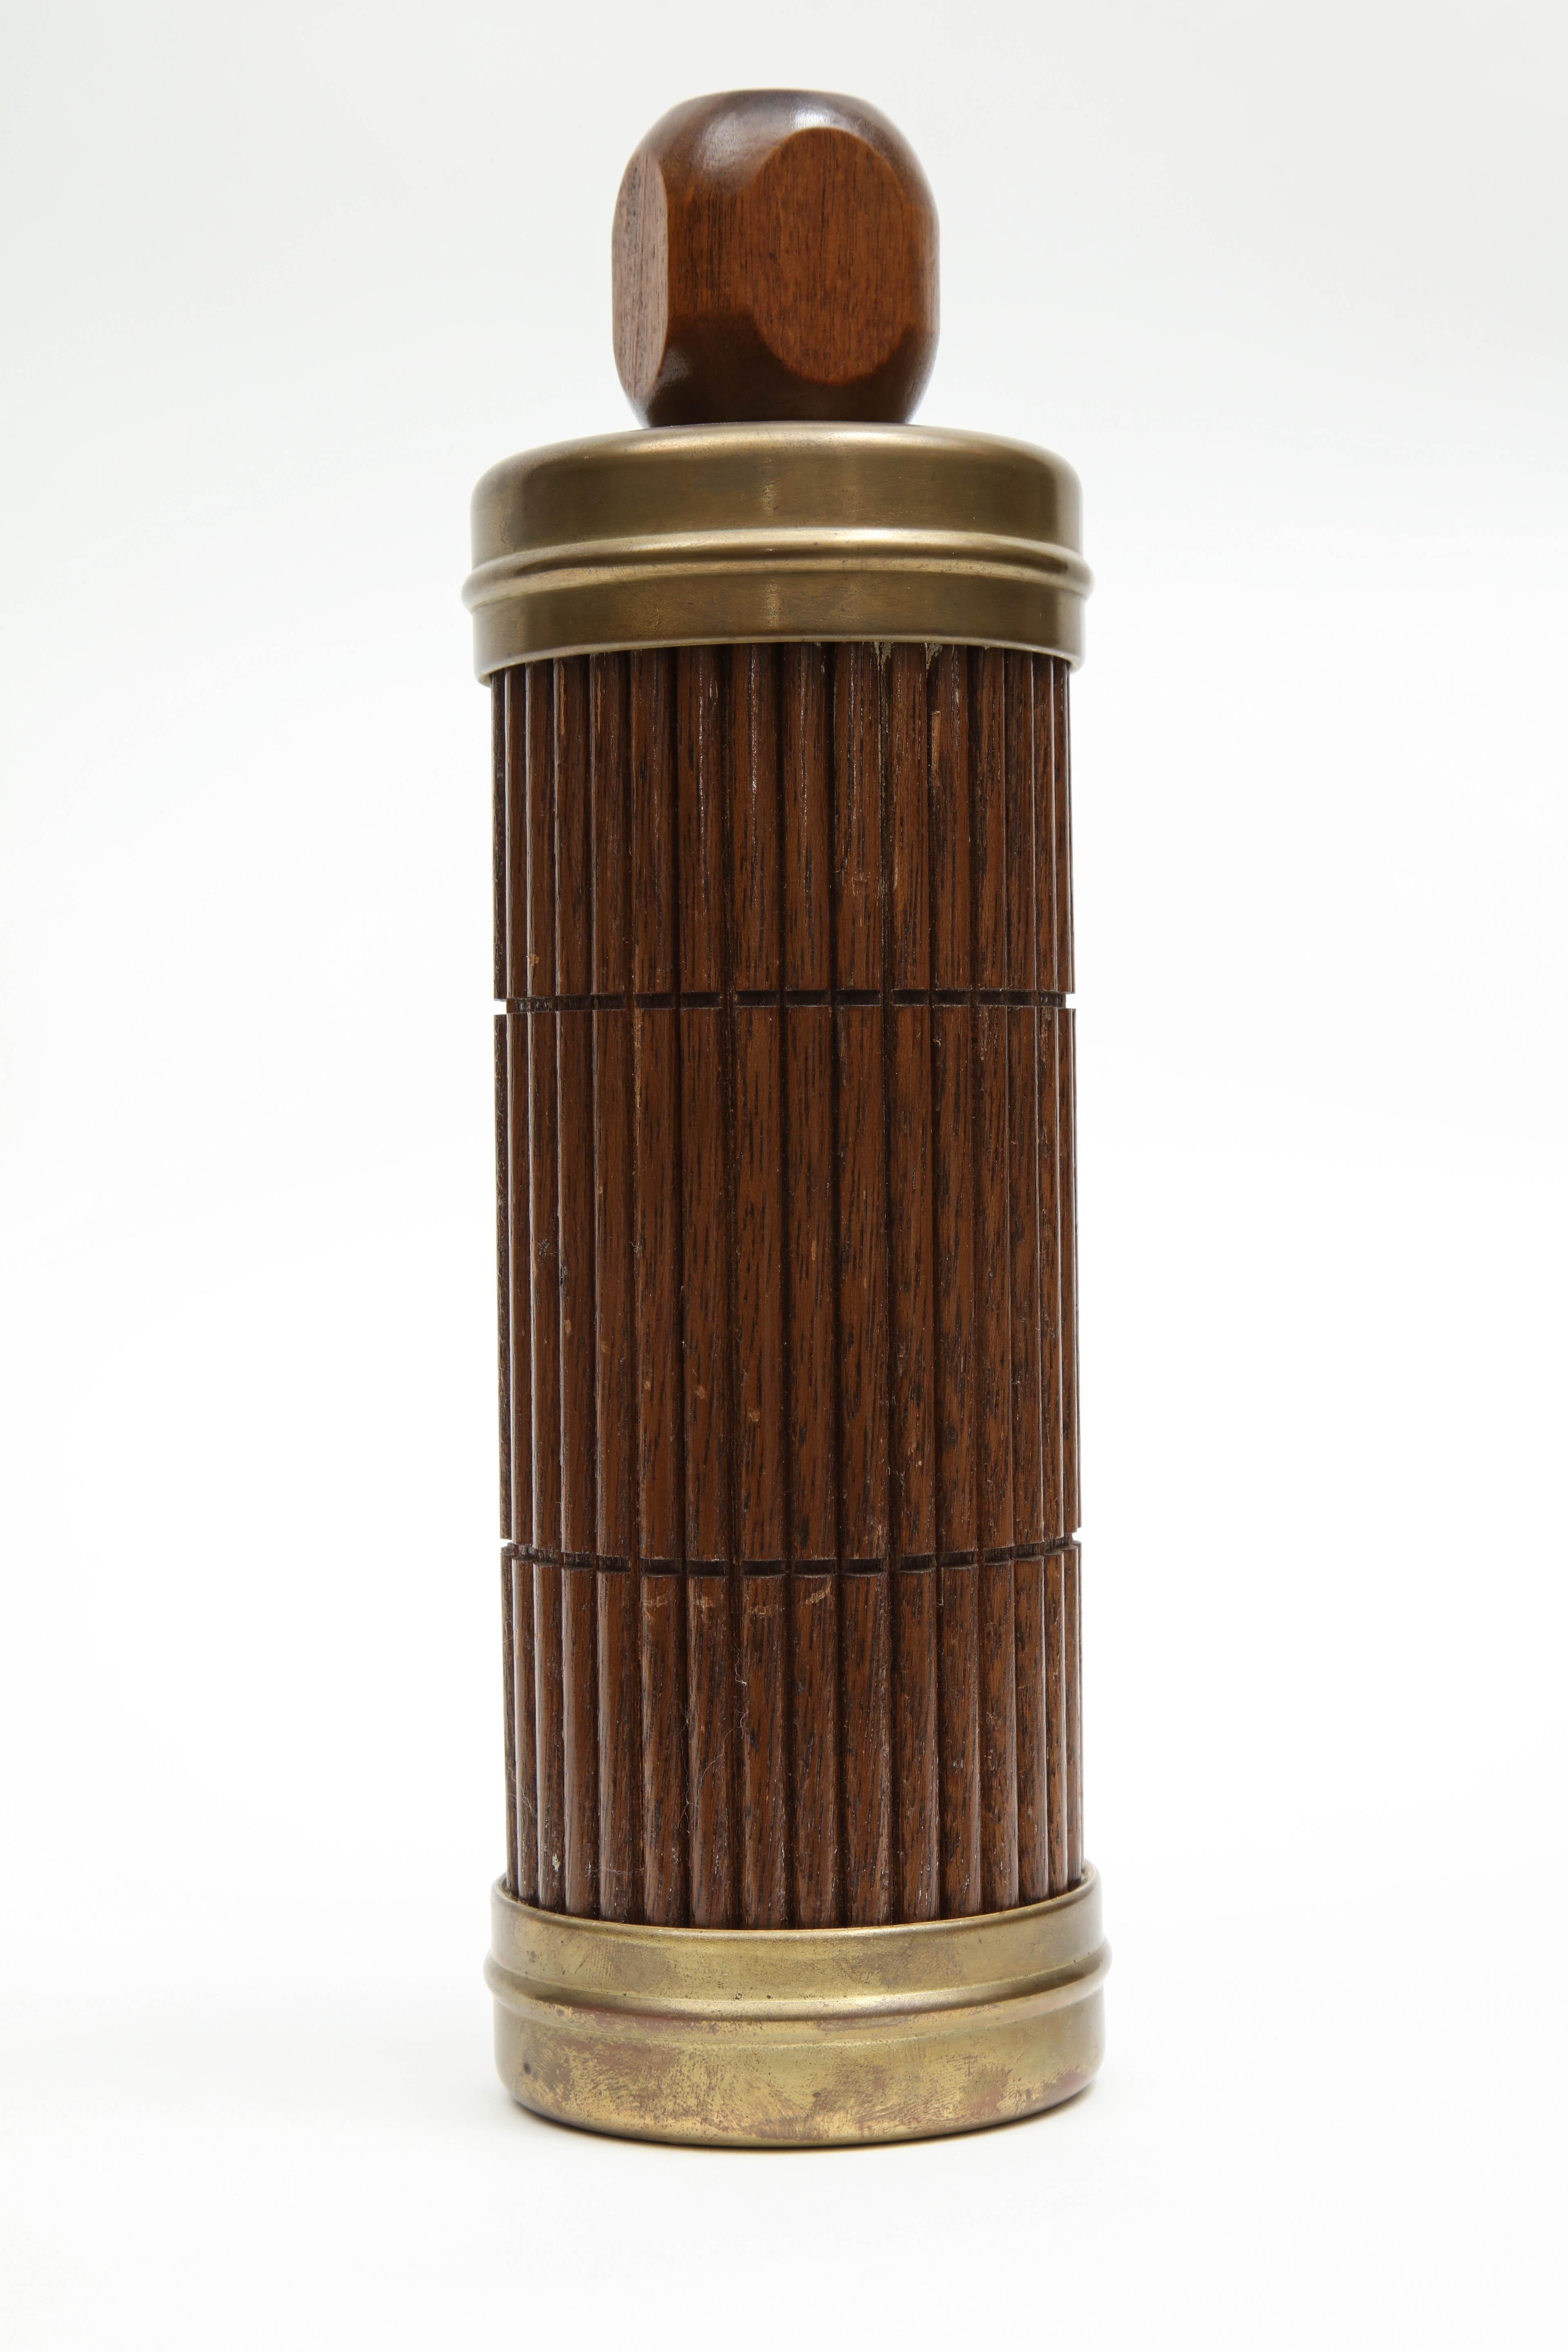 Mid-Century Modern Thermo from Japan, Midcentury, Brown Bamboo with Metal Details, C 1950, Japan For Sale